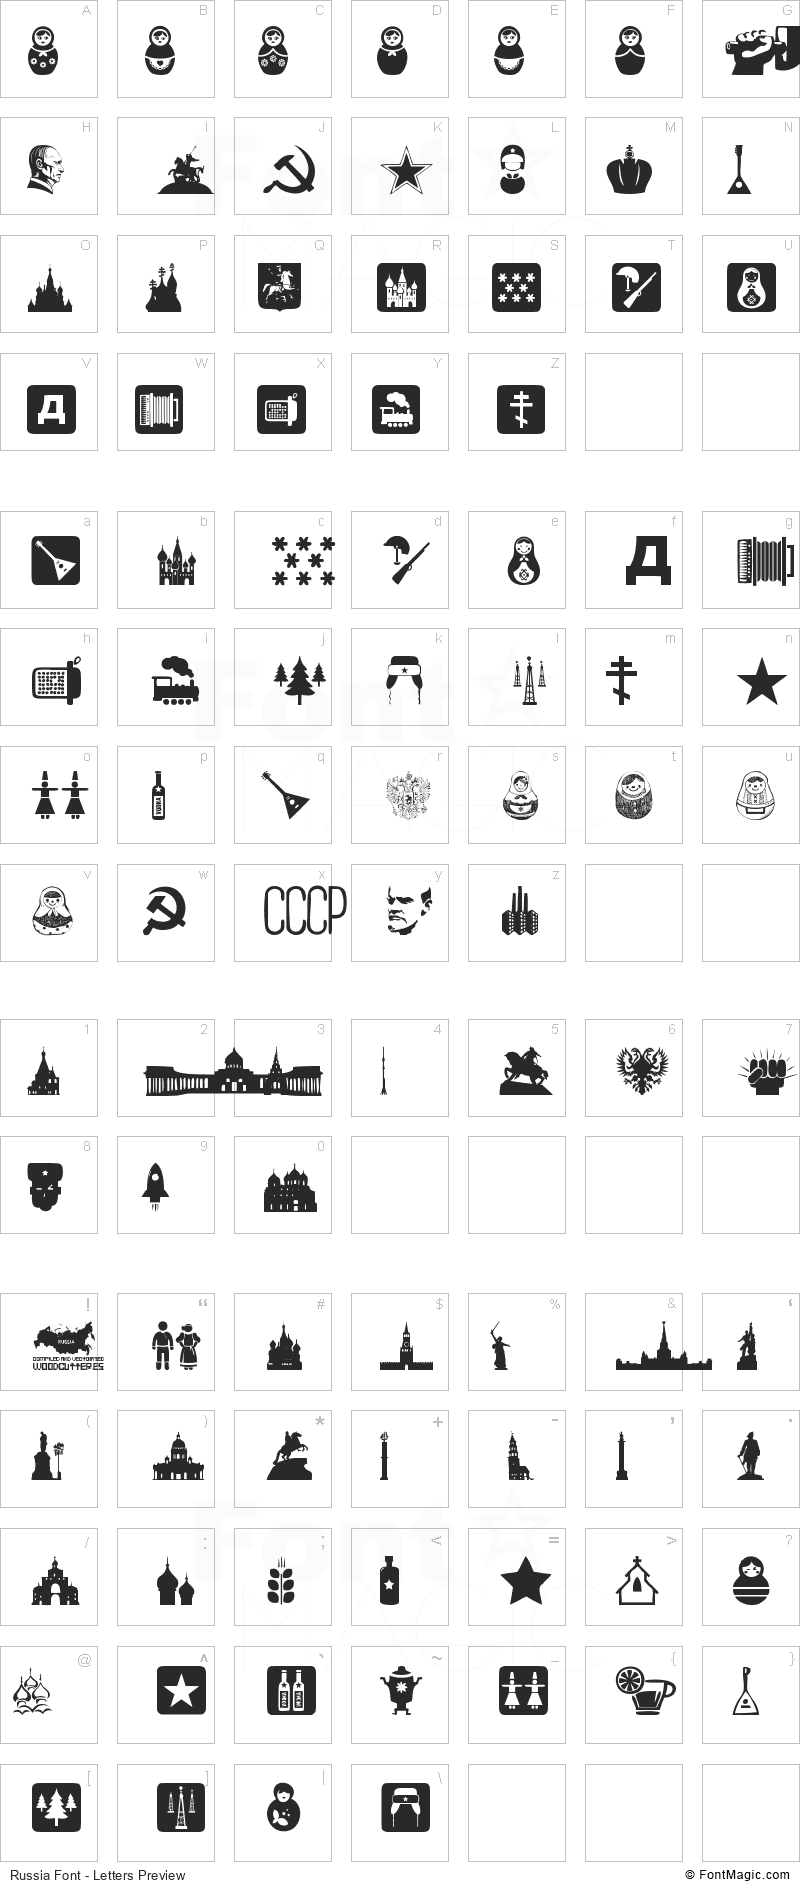 Russia Font - All Latters Preview Chart